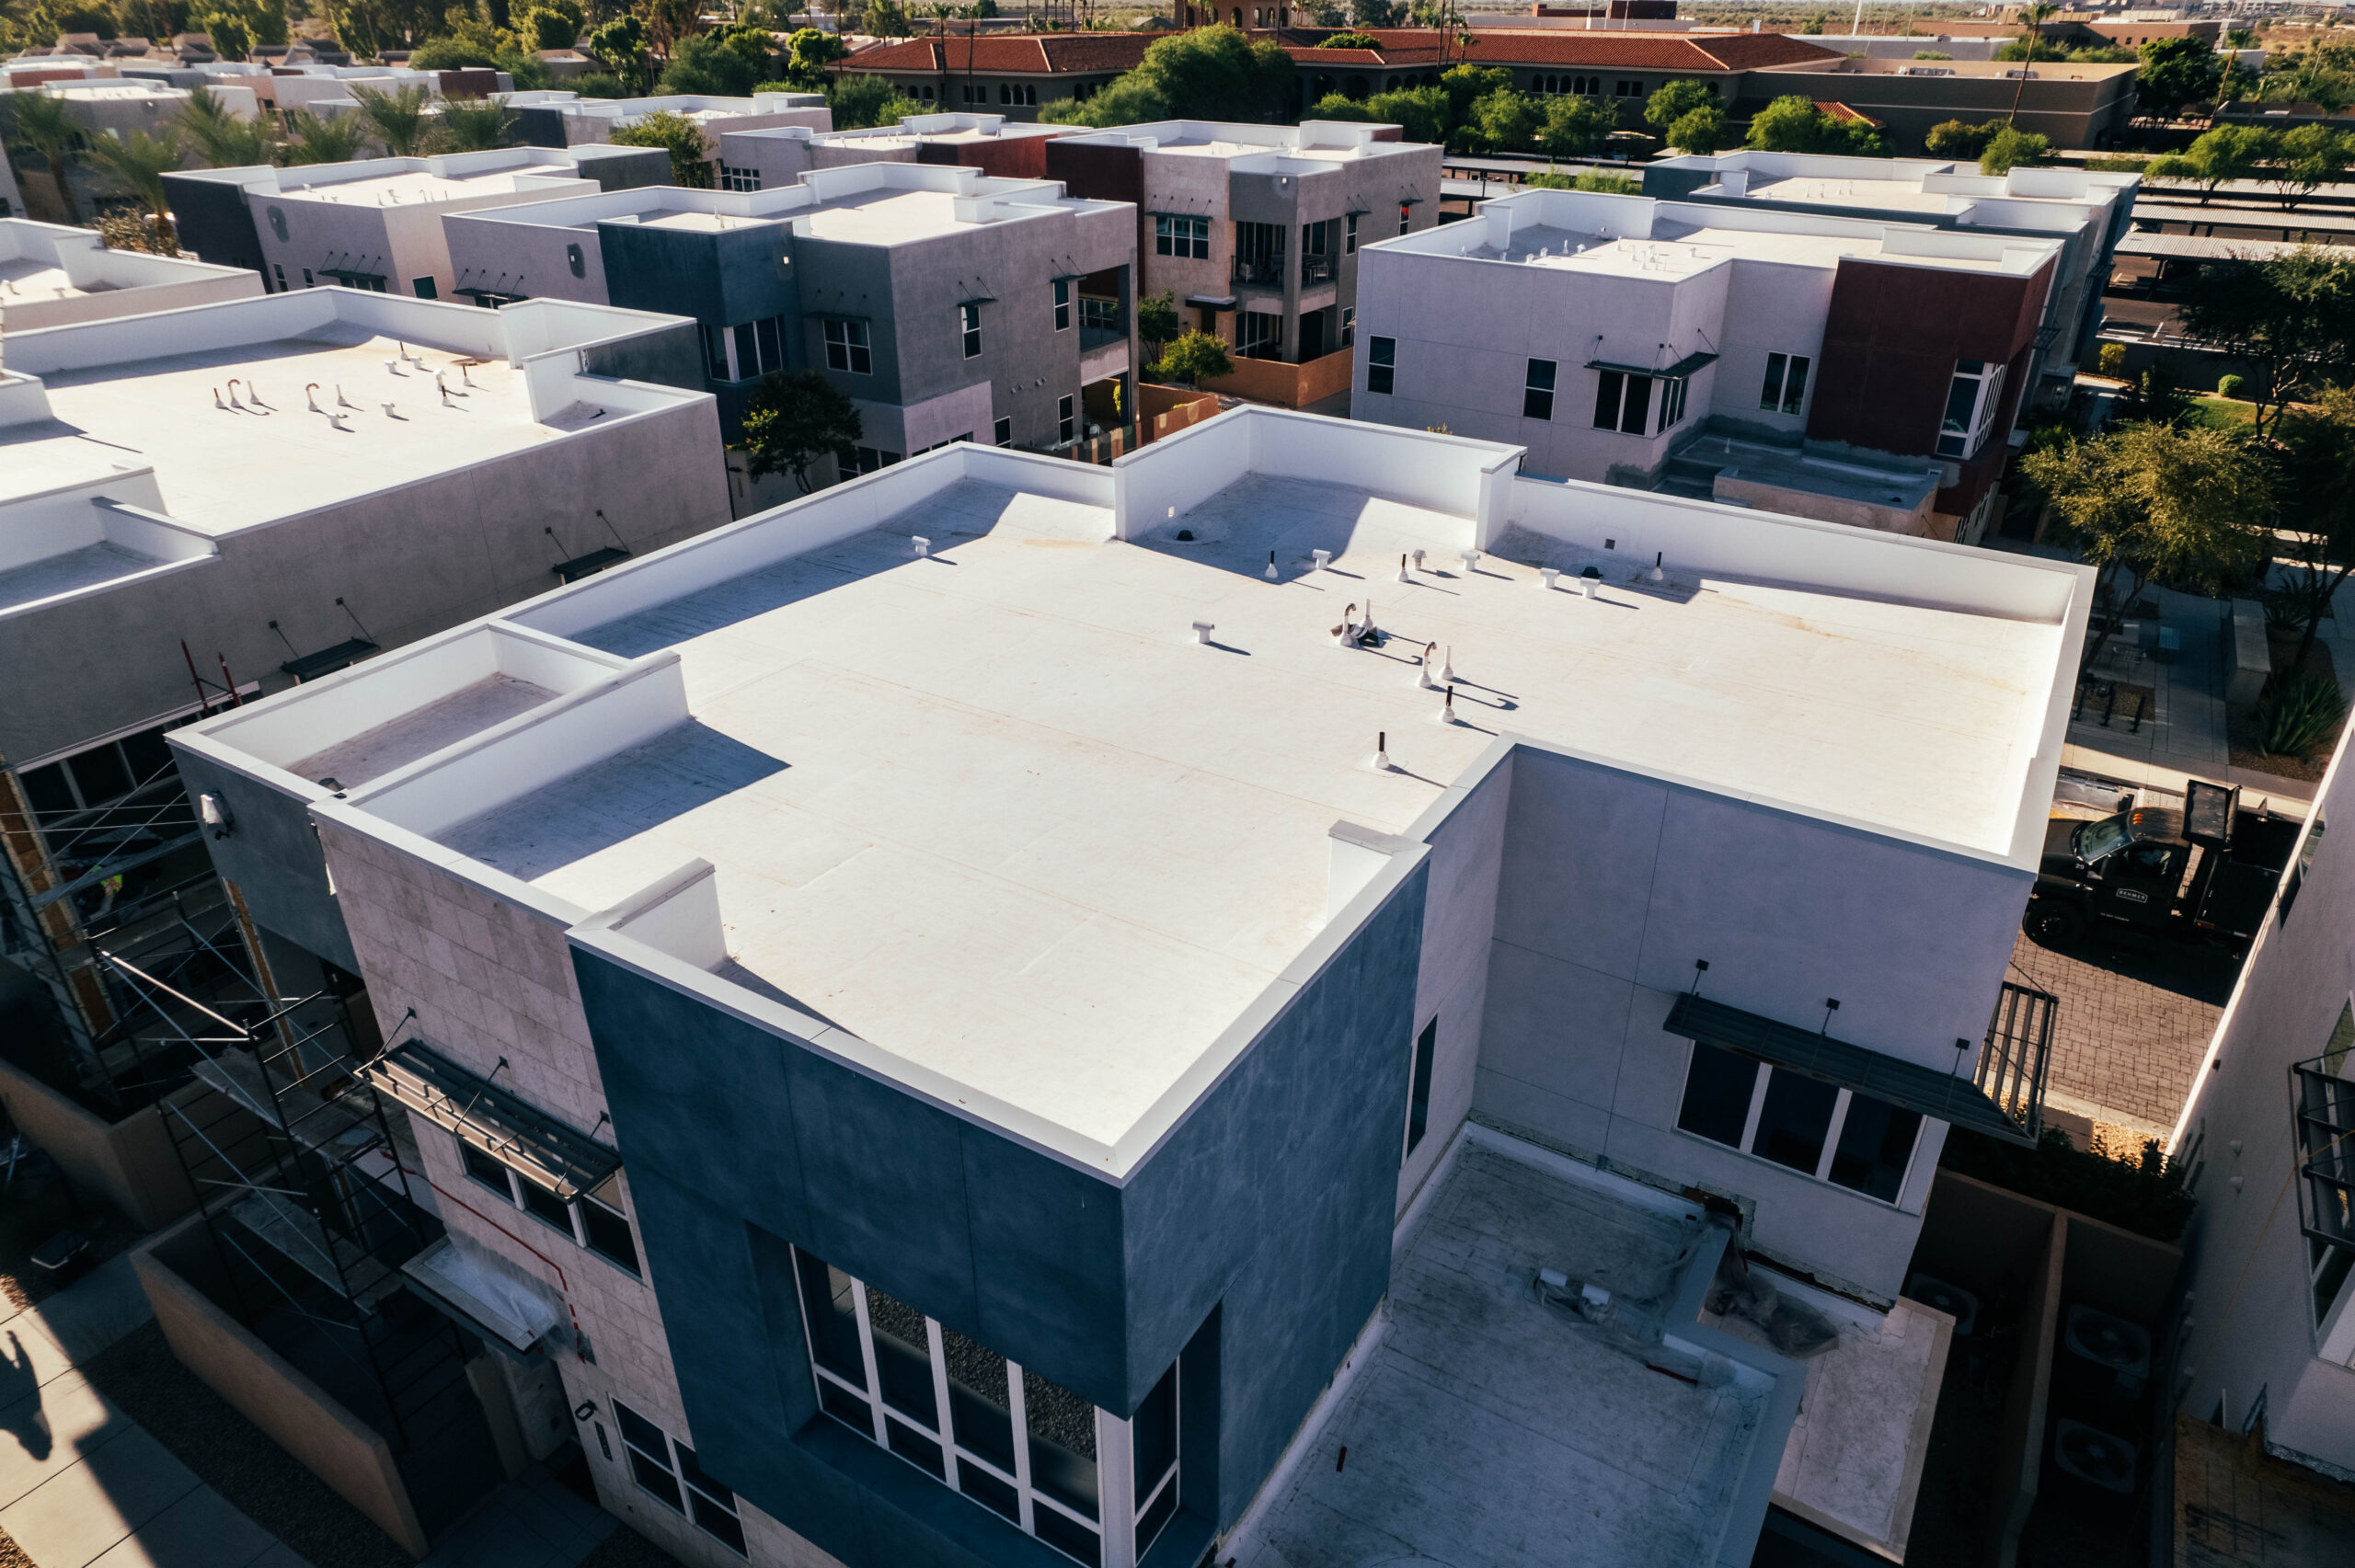 Recently coated apartment complex in Silverleaf featuring energy-efficient foam roofing.